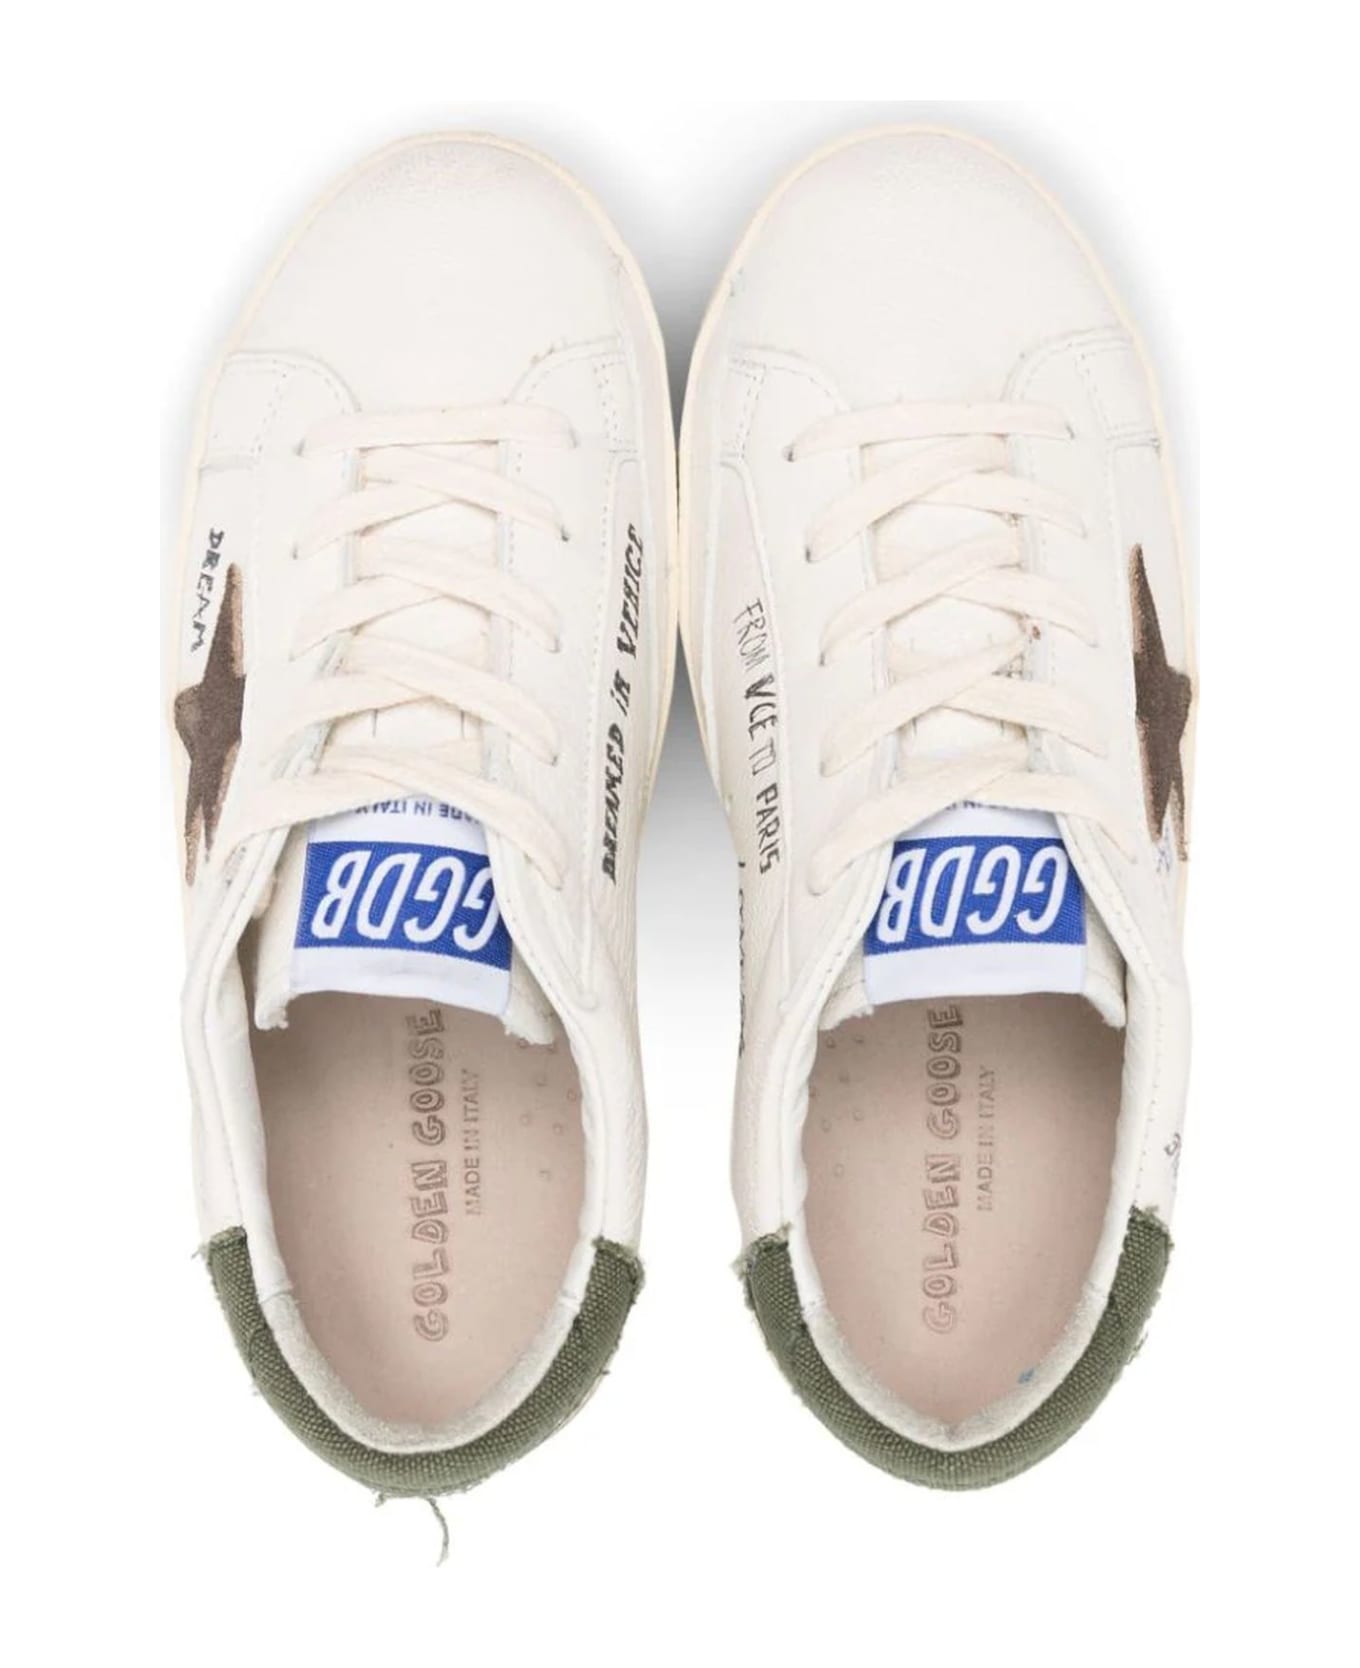 Golden Goose White Leather Sneakers - White/Brown/Green シューズ